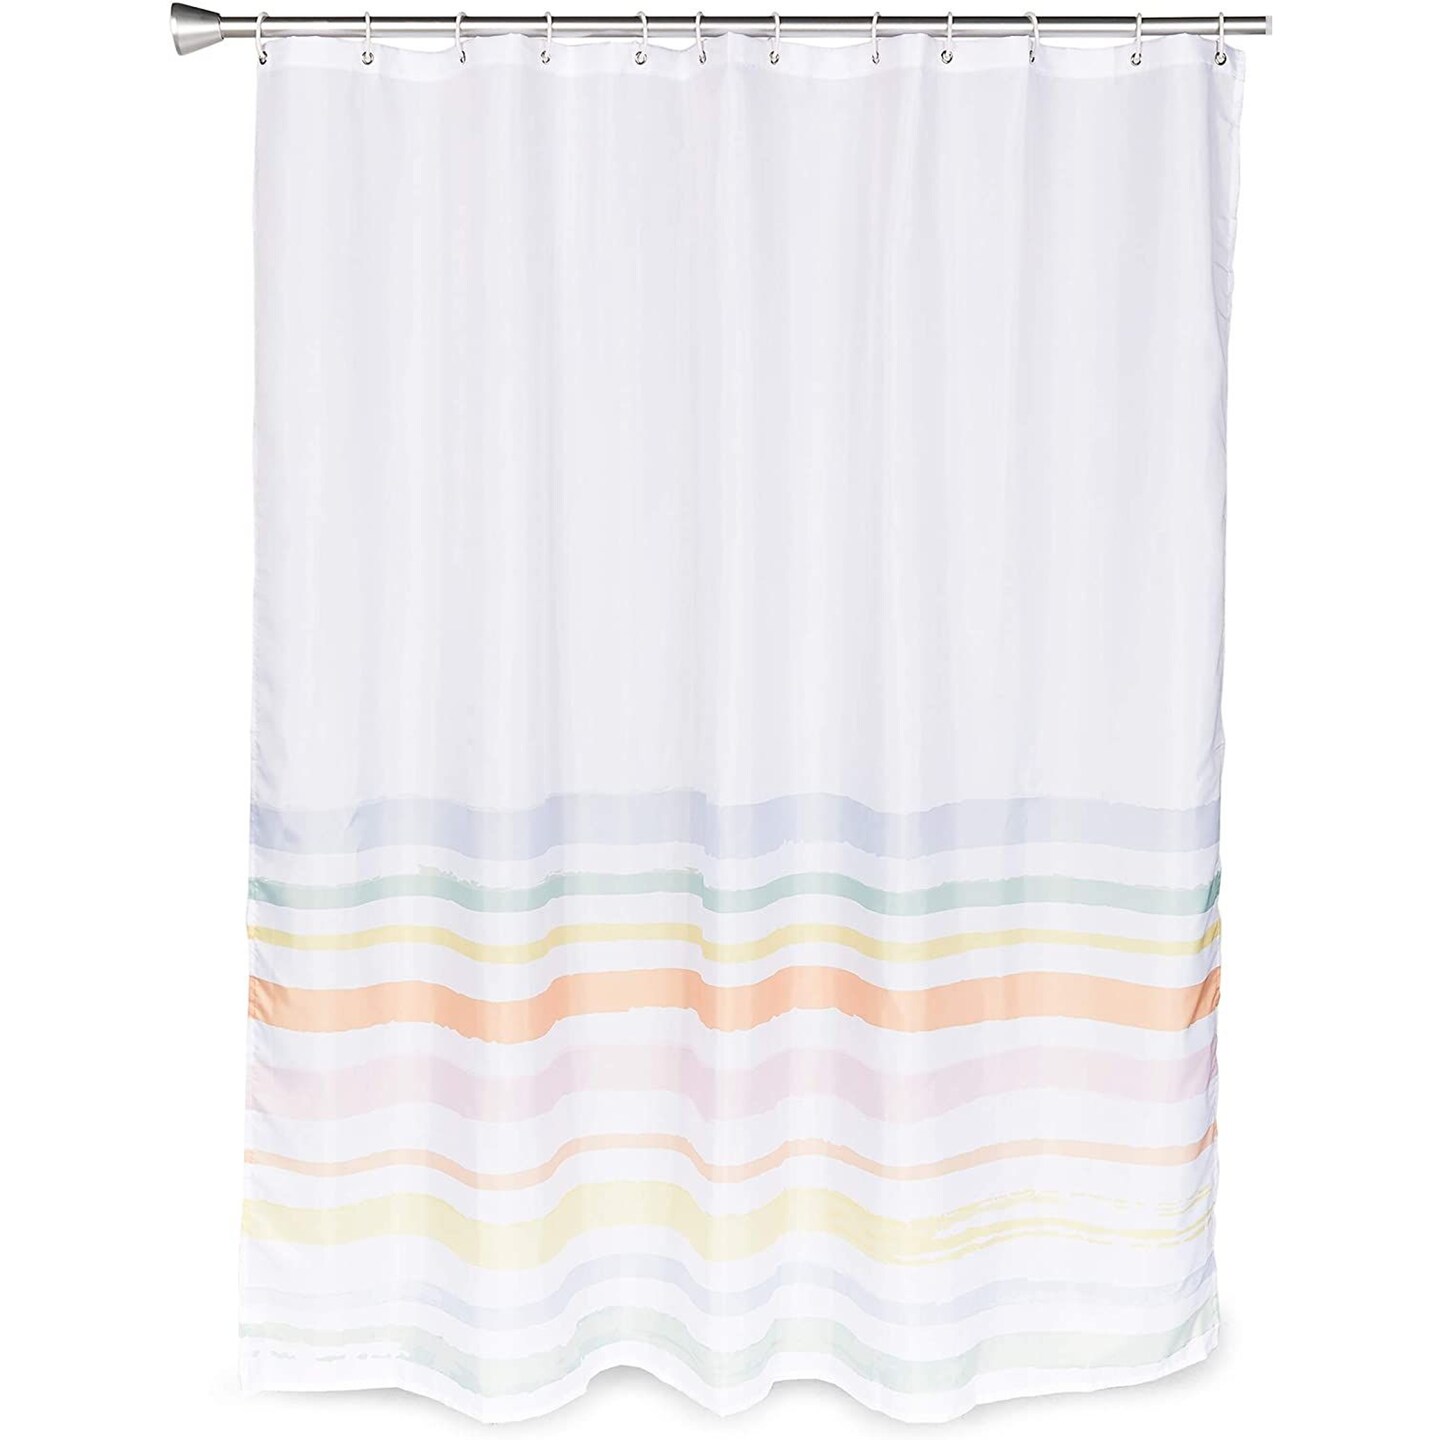 Okuna Outpost Striped Shower Curtain Set with 12 Hooks for